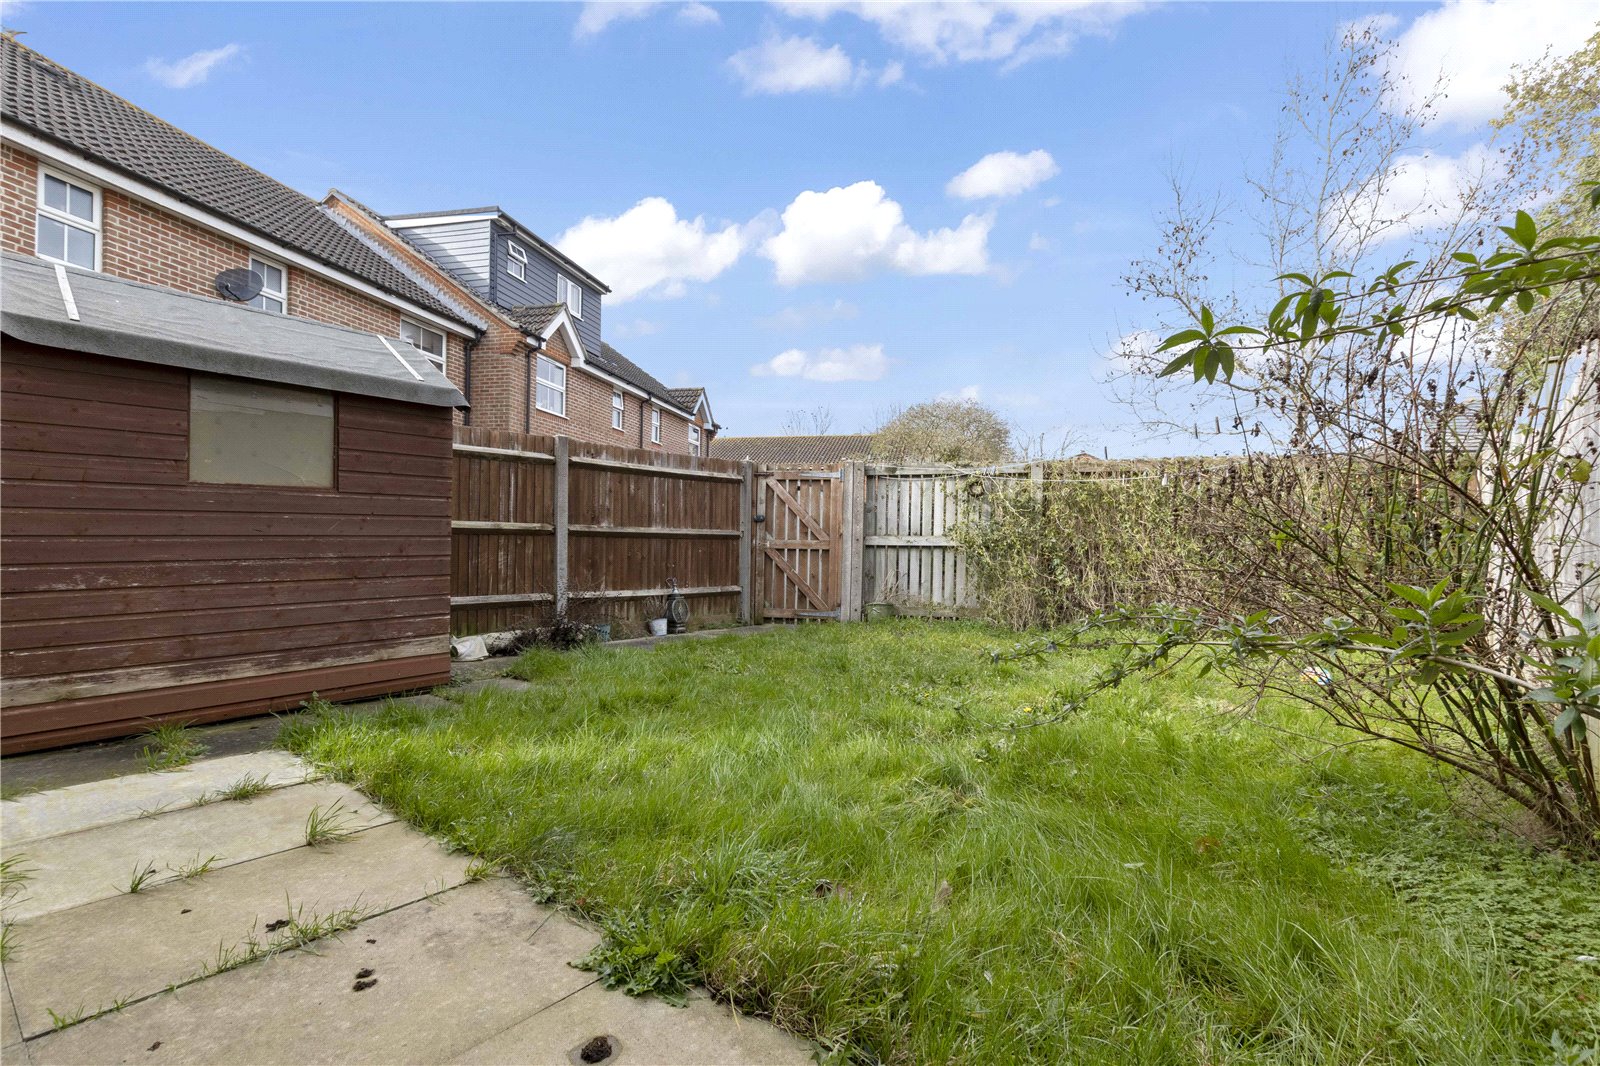 3 bed house for sale in Swanfield Drive, Chichester  - Property Image 4